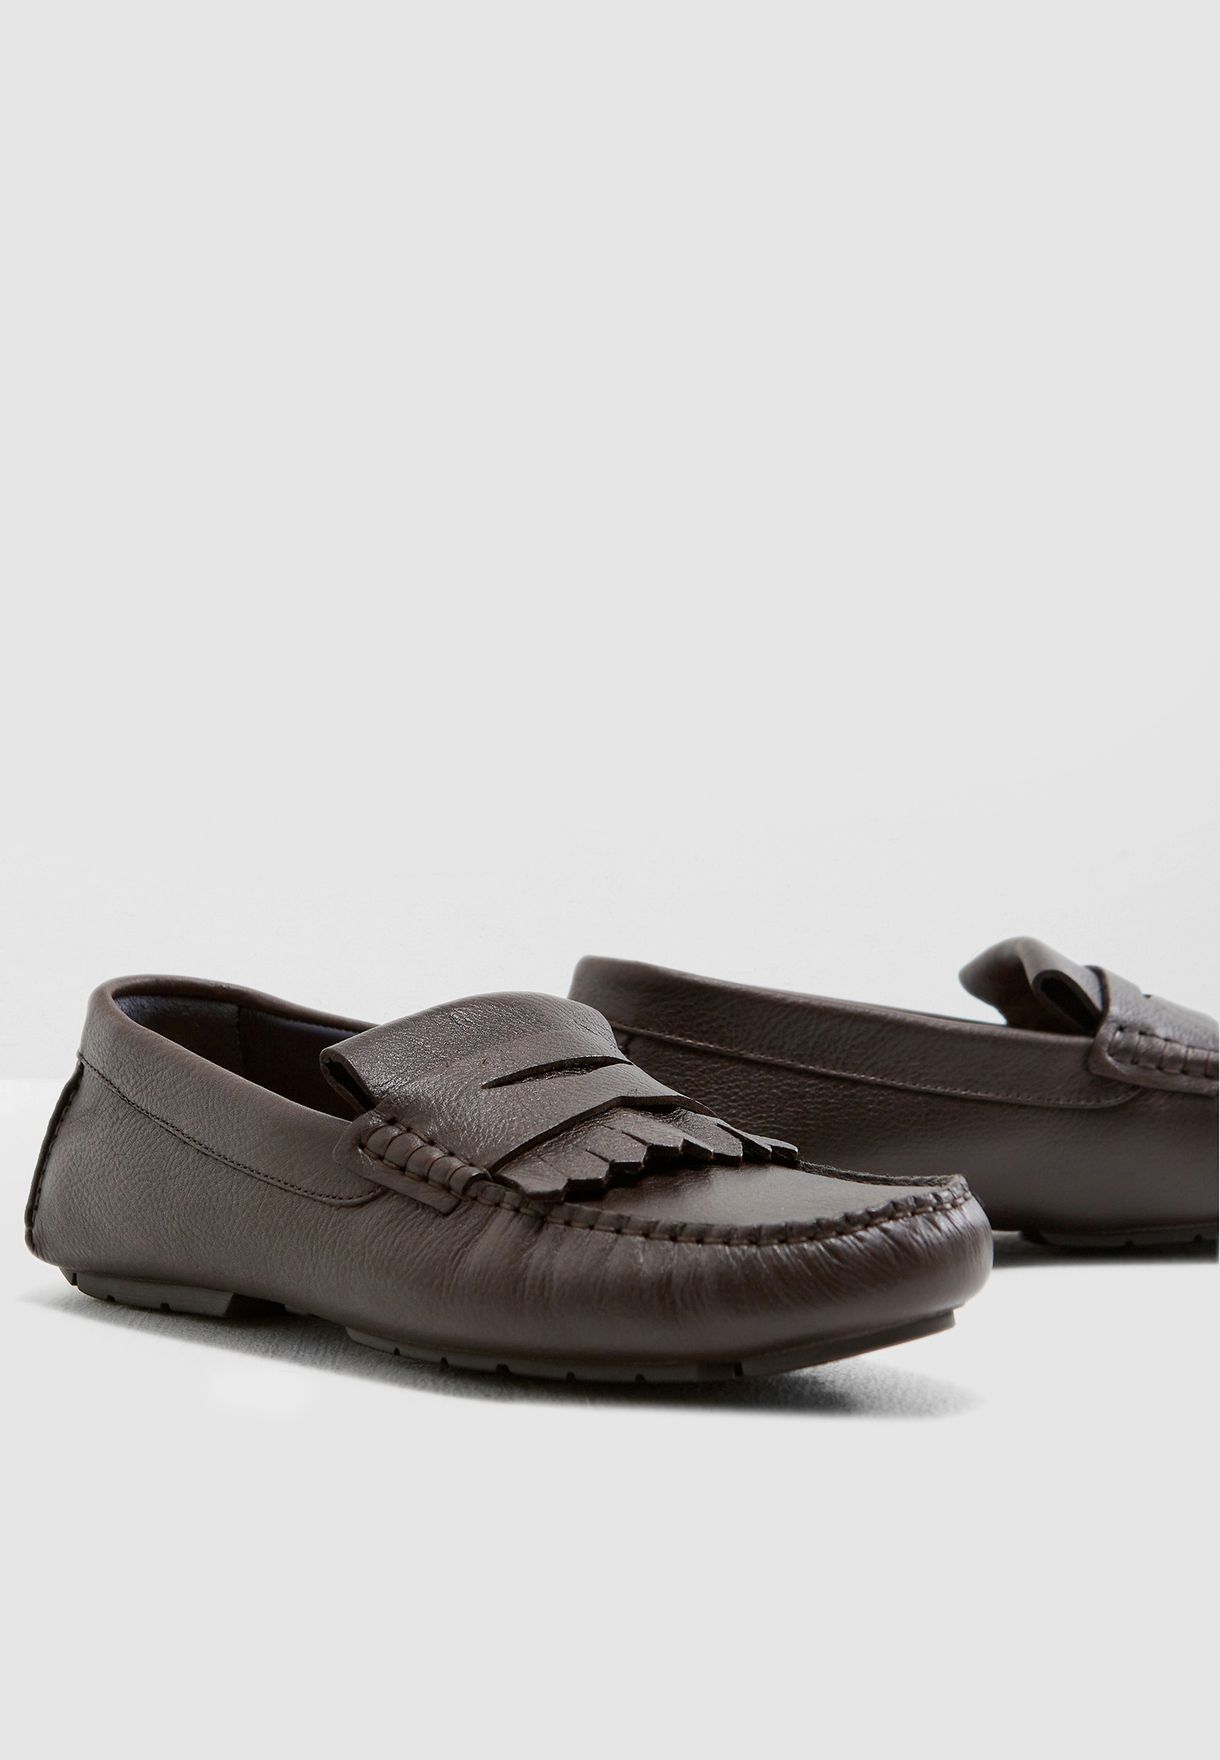 tommy hilfiger brown loafers